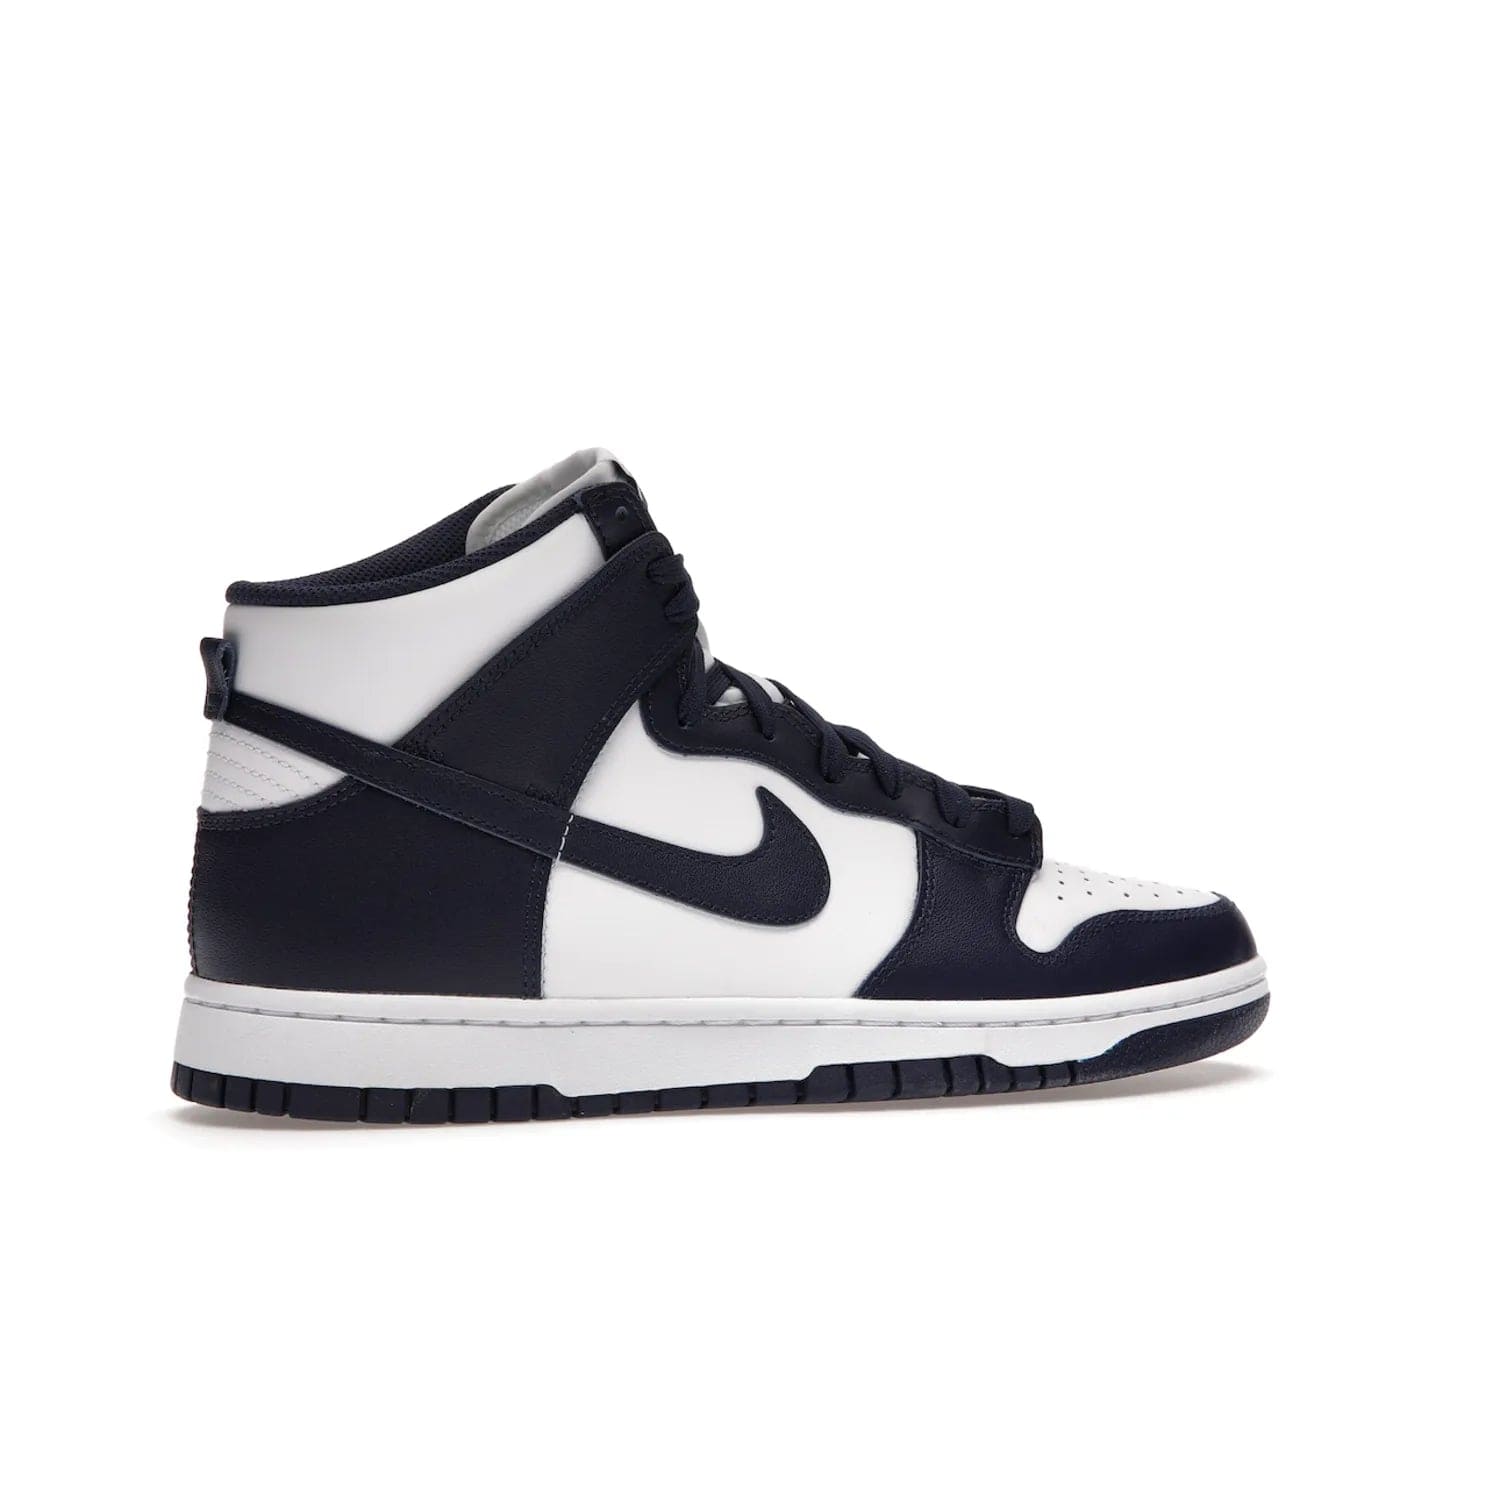 Nike Dunk High Championship Navy - Image 35 - Only at www.BallersClubKickz.com - Classic athletic style meets striking color-blocking on the Nike Dunk High Championship Navy. A white leather upper with Championship Navy overlays creates a retro look with a woven tongue label and sole. Unleash your inner champion with the Nike Dunk High Championship Navy.